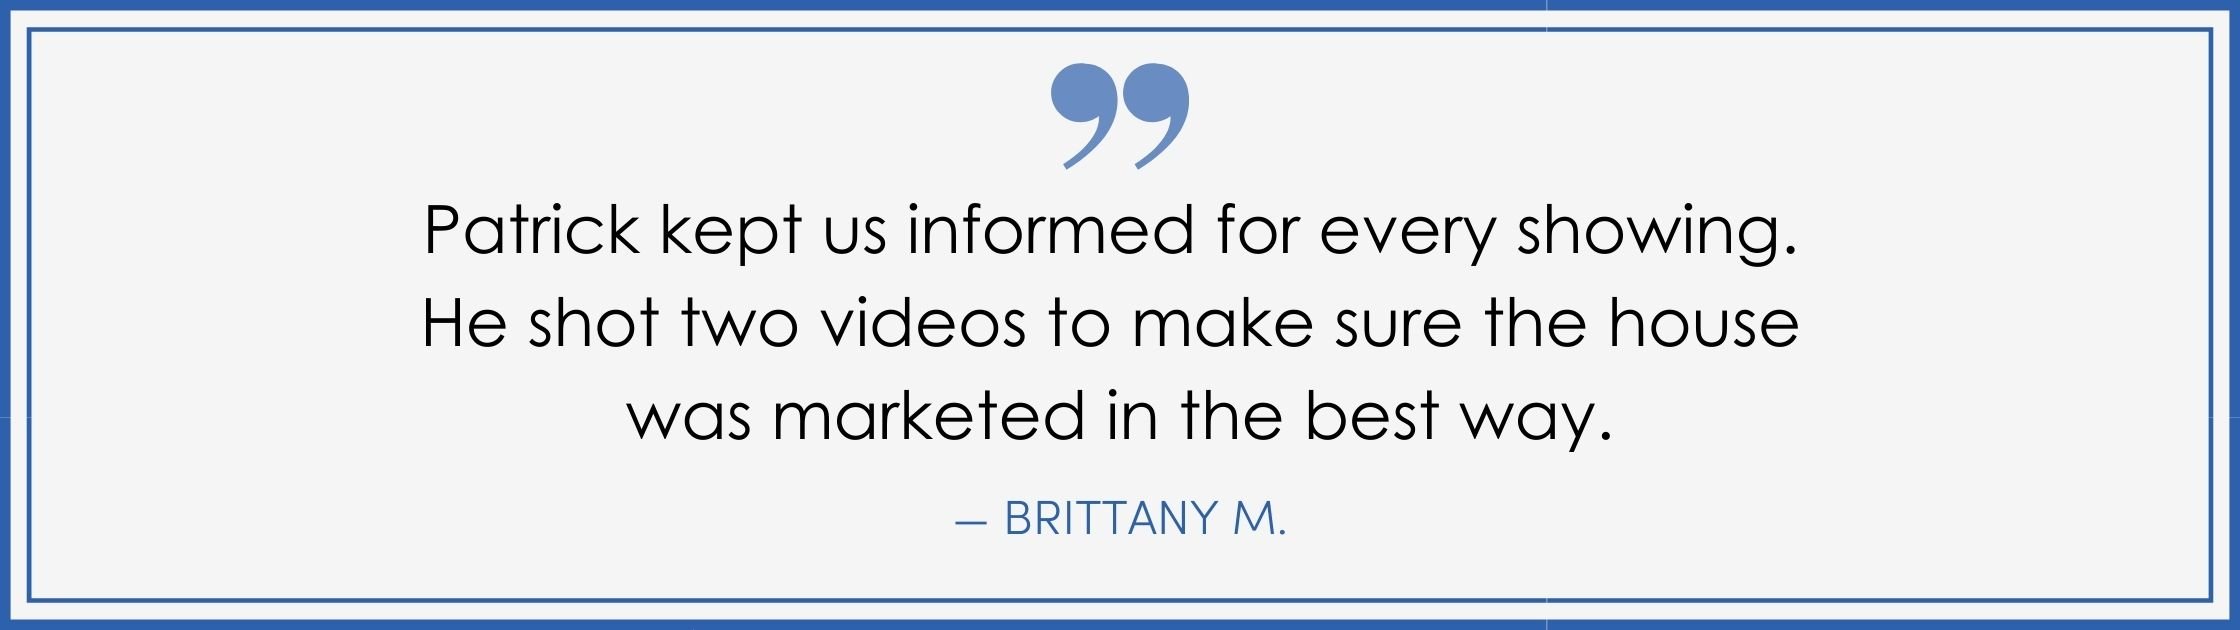 “Patrick kept us informed for every showing. He shot two videos to make sure the house was marketed in the best way.” –Brittany M. (Copy) (Copy)